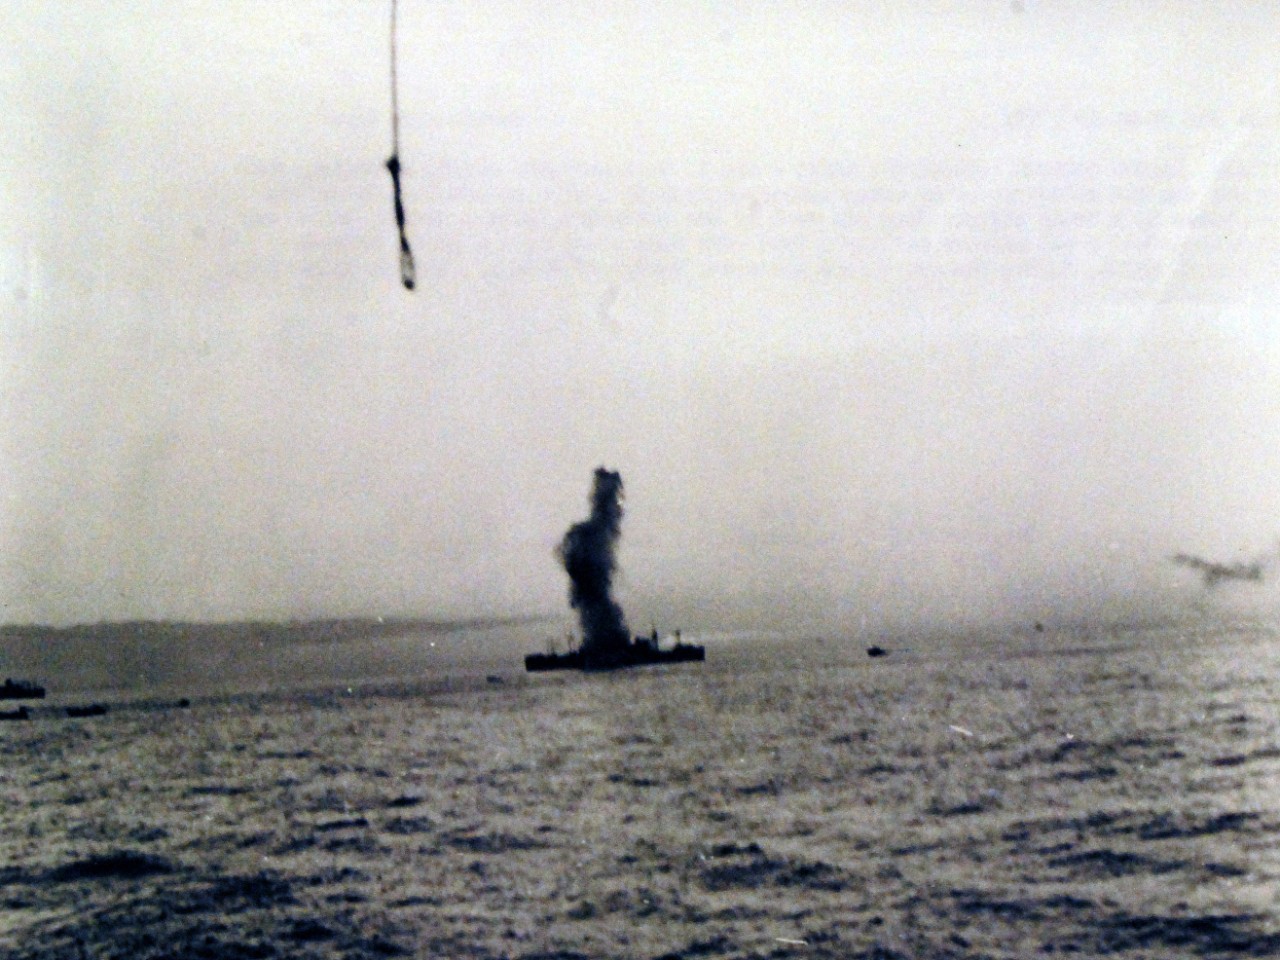 <p>19-LCM-North Africa-1: Naval Battle of Casablanca, November 8-16, 1942. French Morocco, (Casablanca area). U.S. Navy transport USS Edward Rutledge (AP-52), just as she was hit amidships by an enemy submarine torpedo. This remarkable photograph was taken by a naval officer from the deck of the transport USS Hugh L. Scott (AP-43), which had been torpedoed a few minutes earlier. Both were sunk along with a third transport, USS Tasker H. Bliss (AP 42), during the operation in November 1942 off Fedala, about 15 miles north of Casablanca. Photograph released 3 December 1942.&nbsp;</p>
